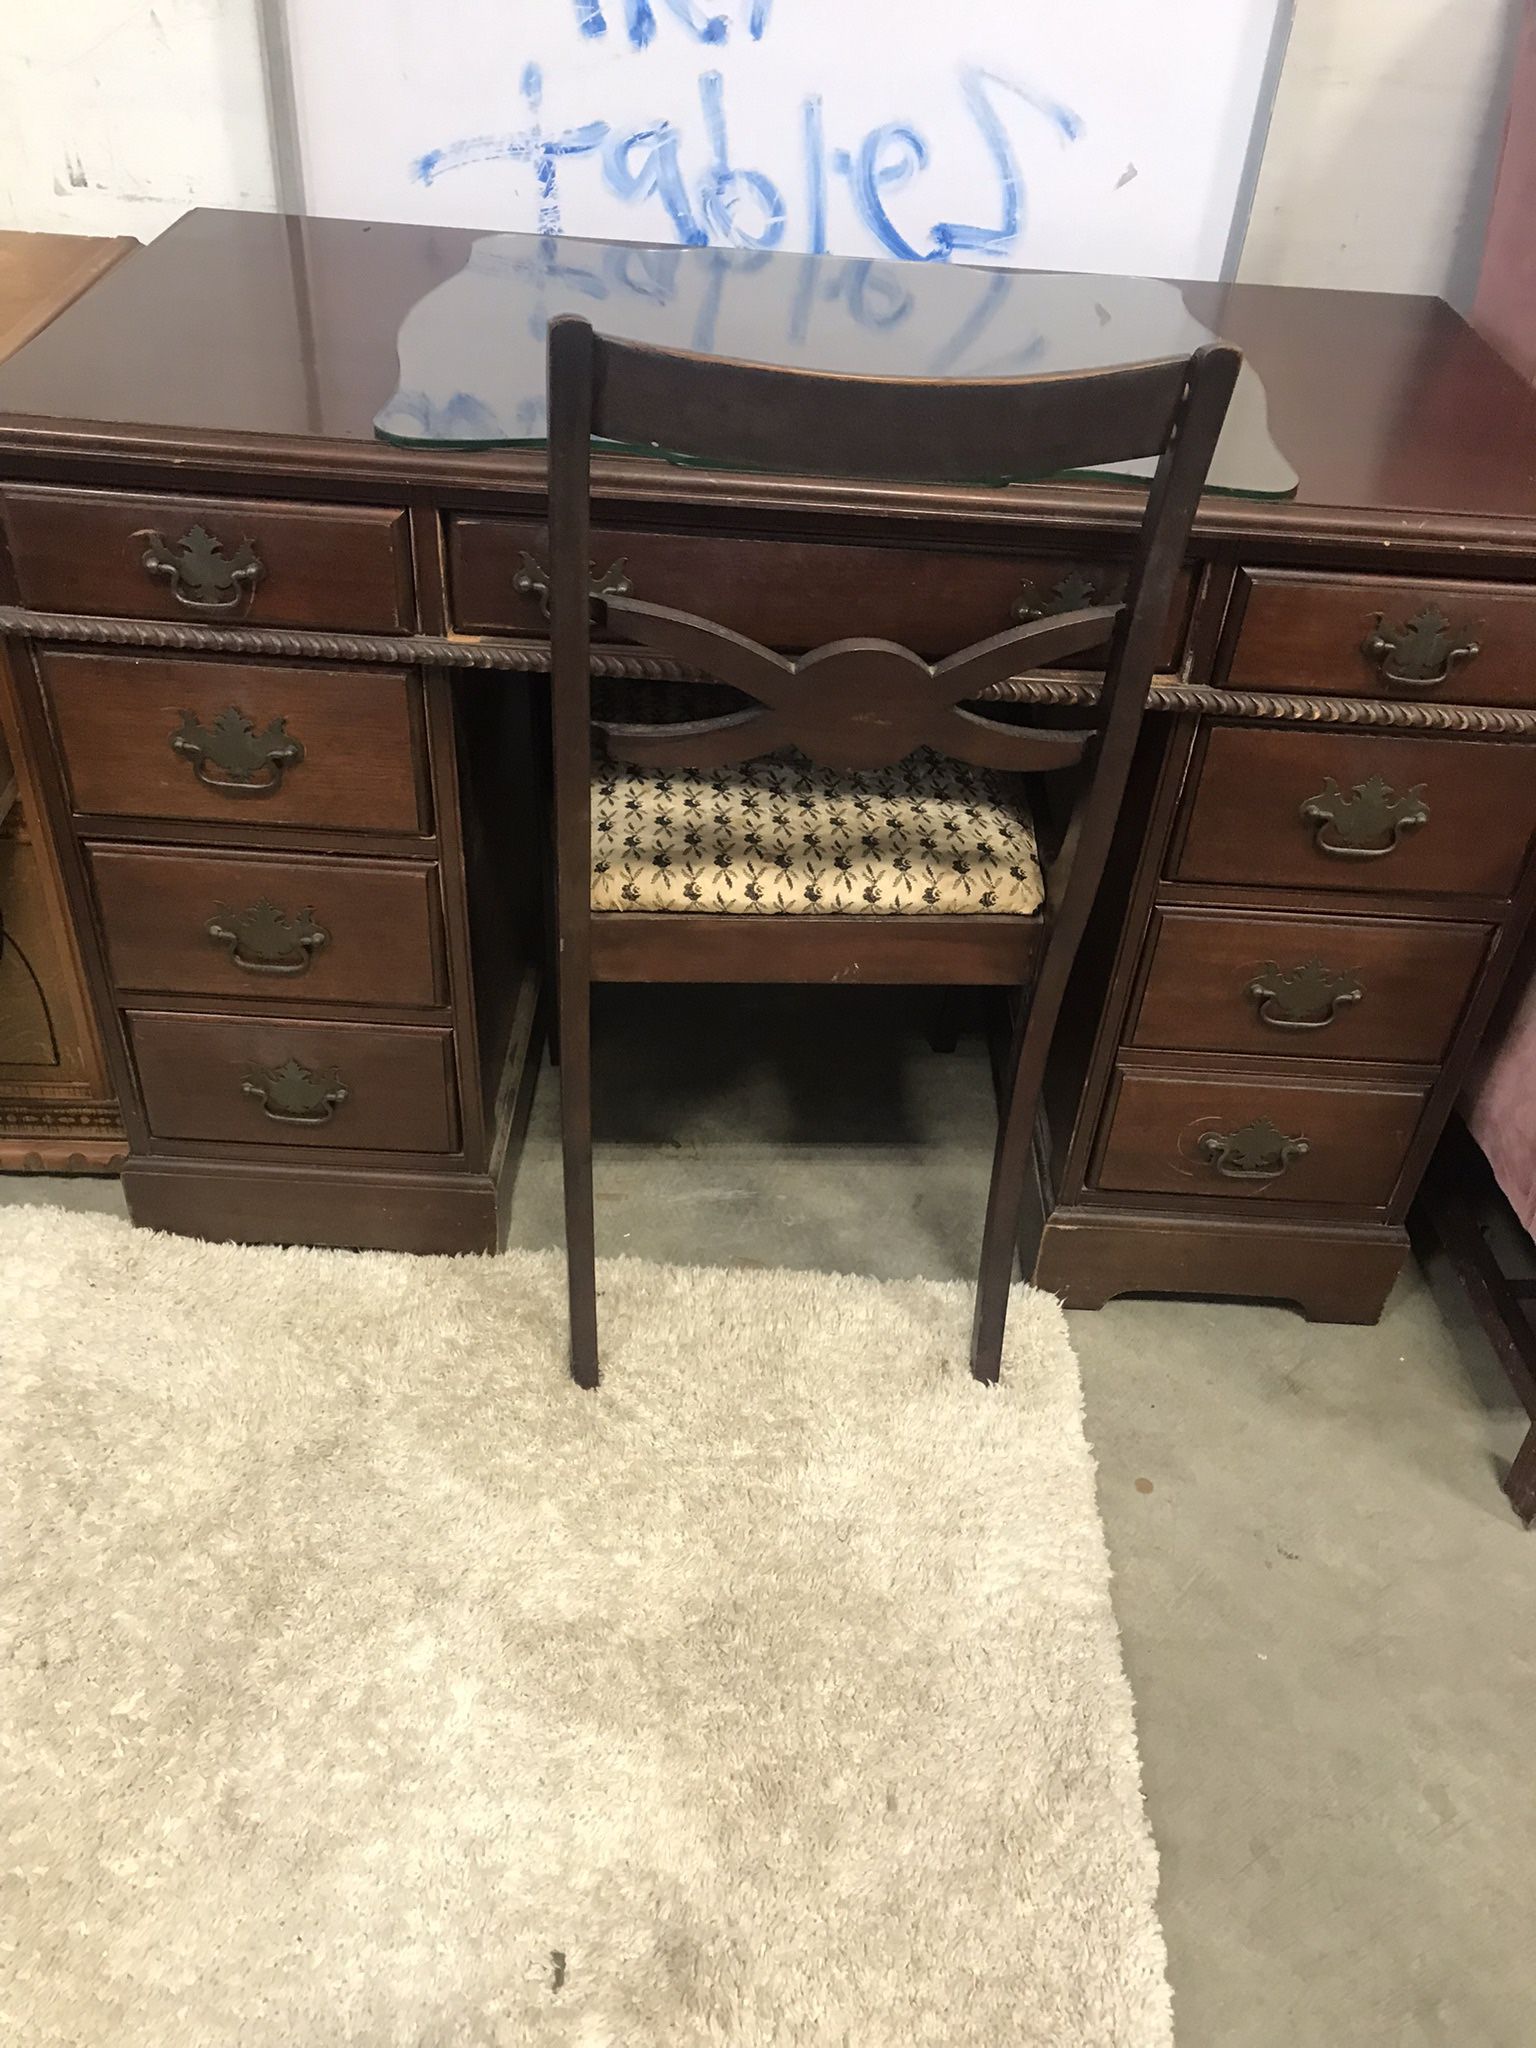 Vintage desk and chair